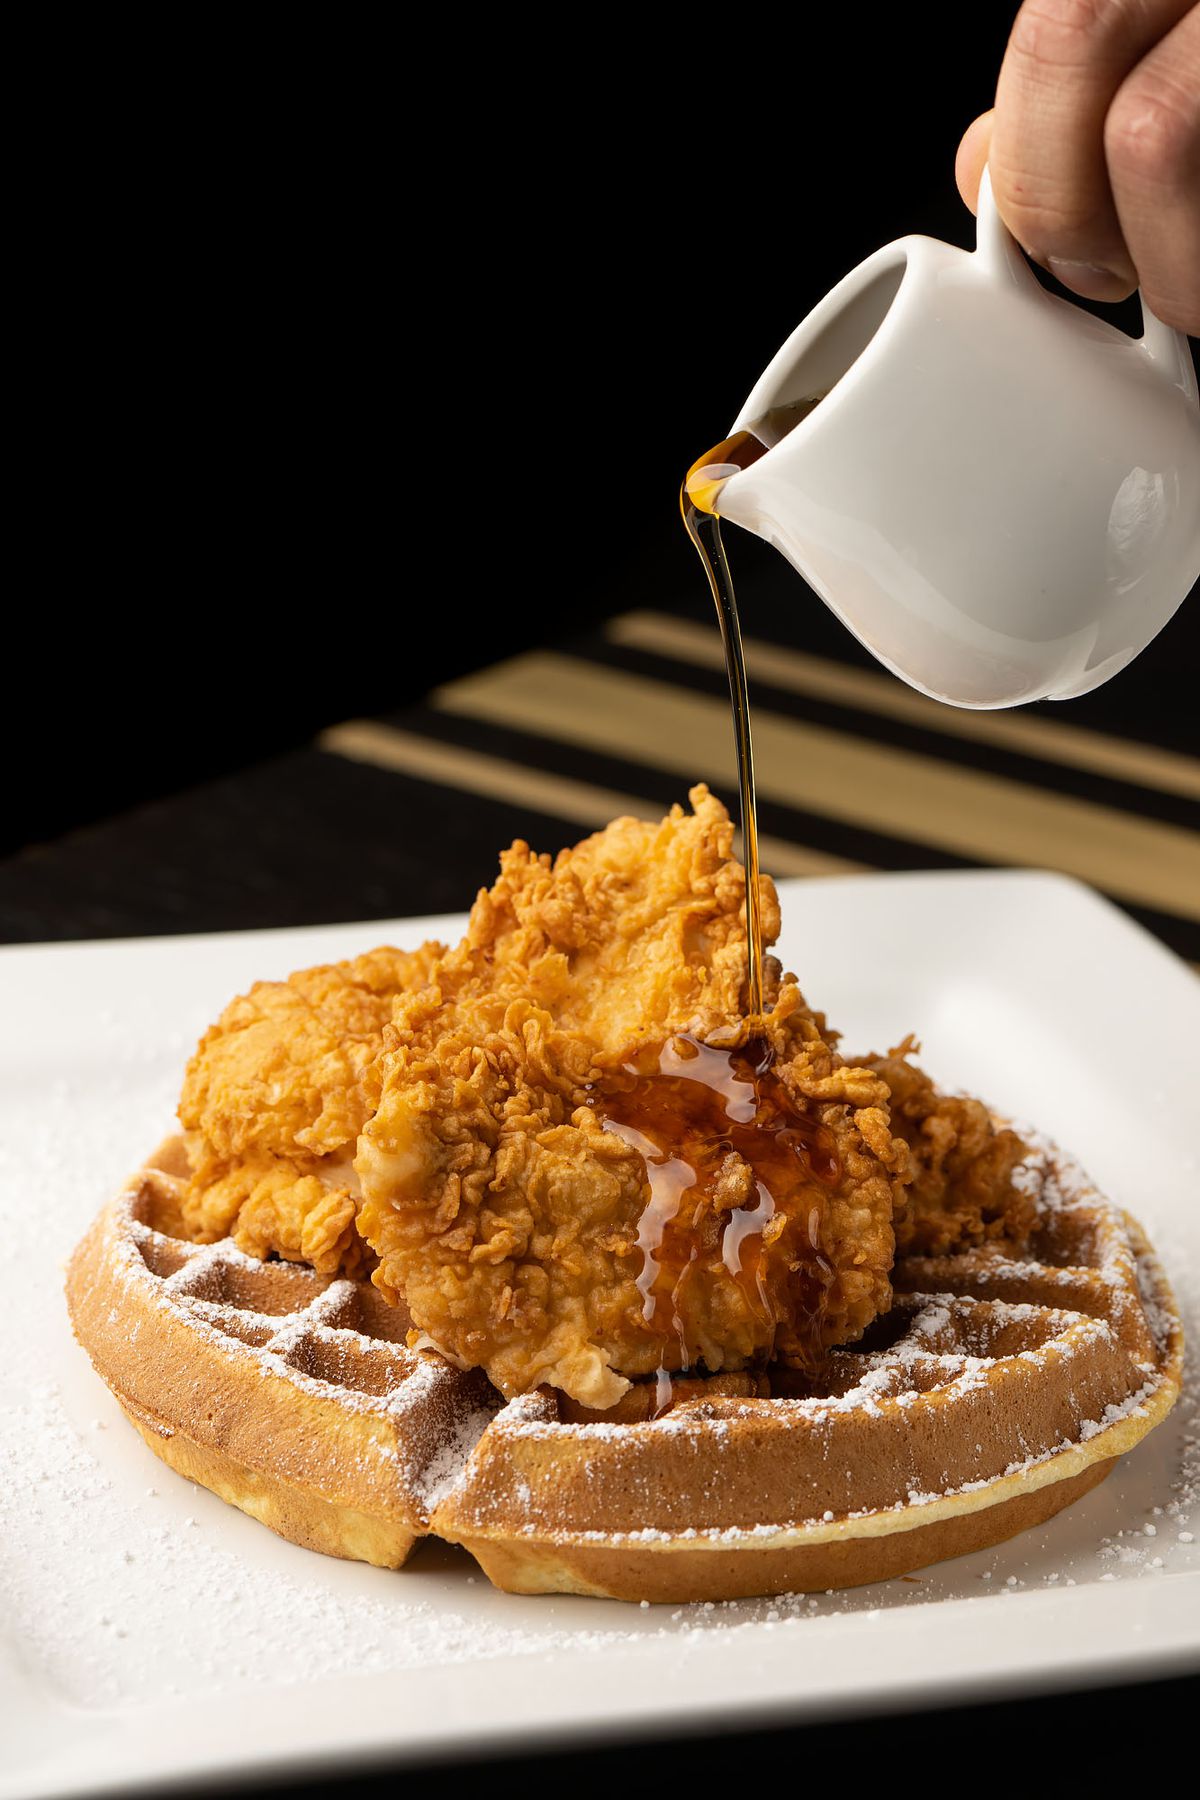 An overhead pour of syrup onto fried chicken and a waffle below.